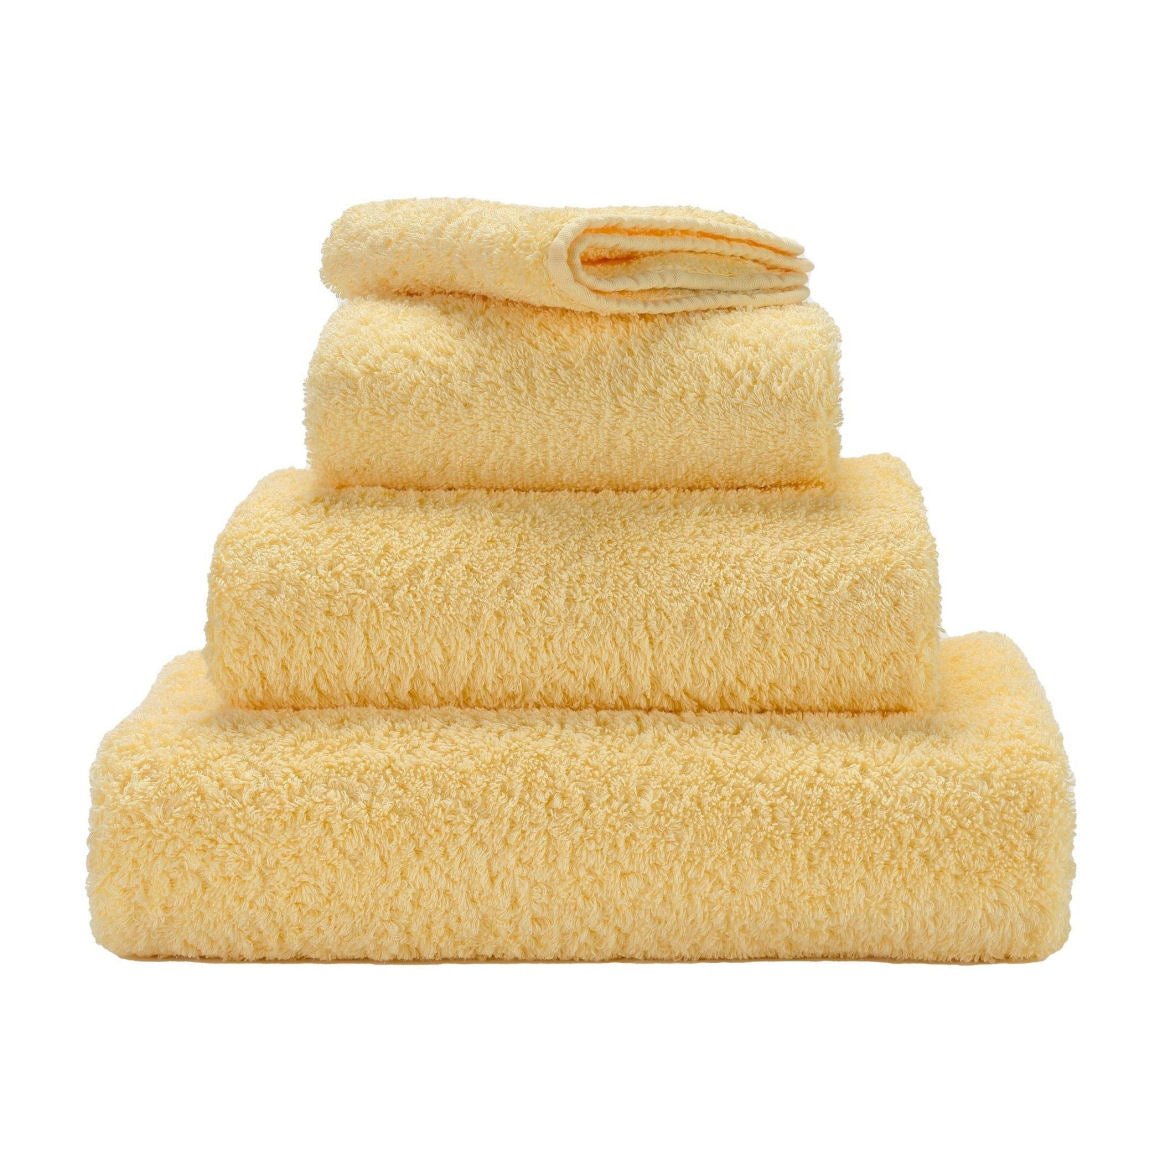 Chic Super Pile Bath Towels by Abyss & Habidecor | 803 Popcorn - |VESIMI Design| Luxury and Rustic bathrooms online